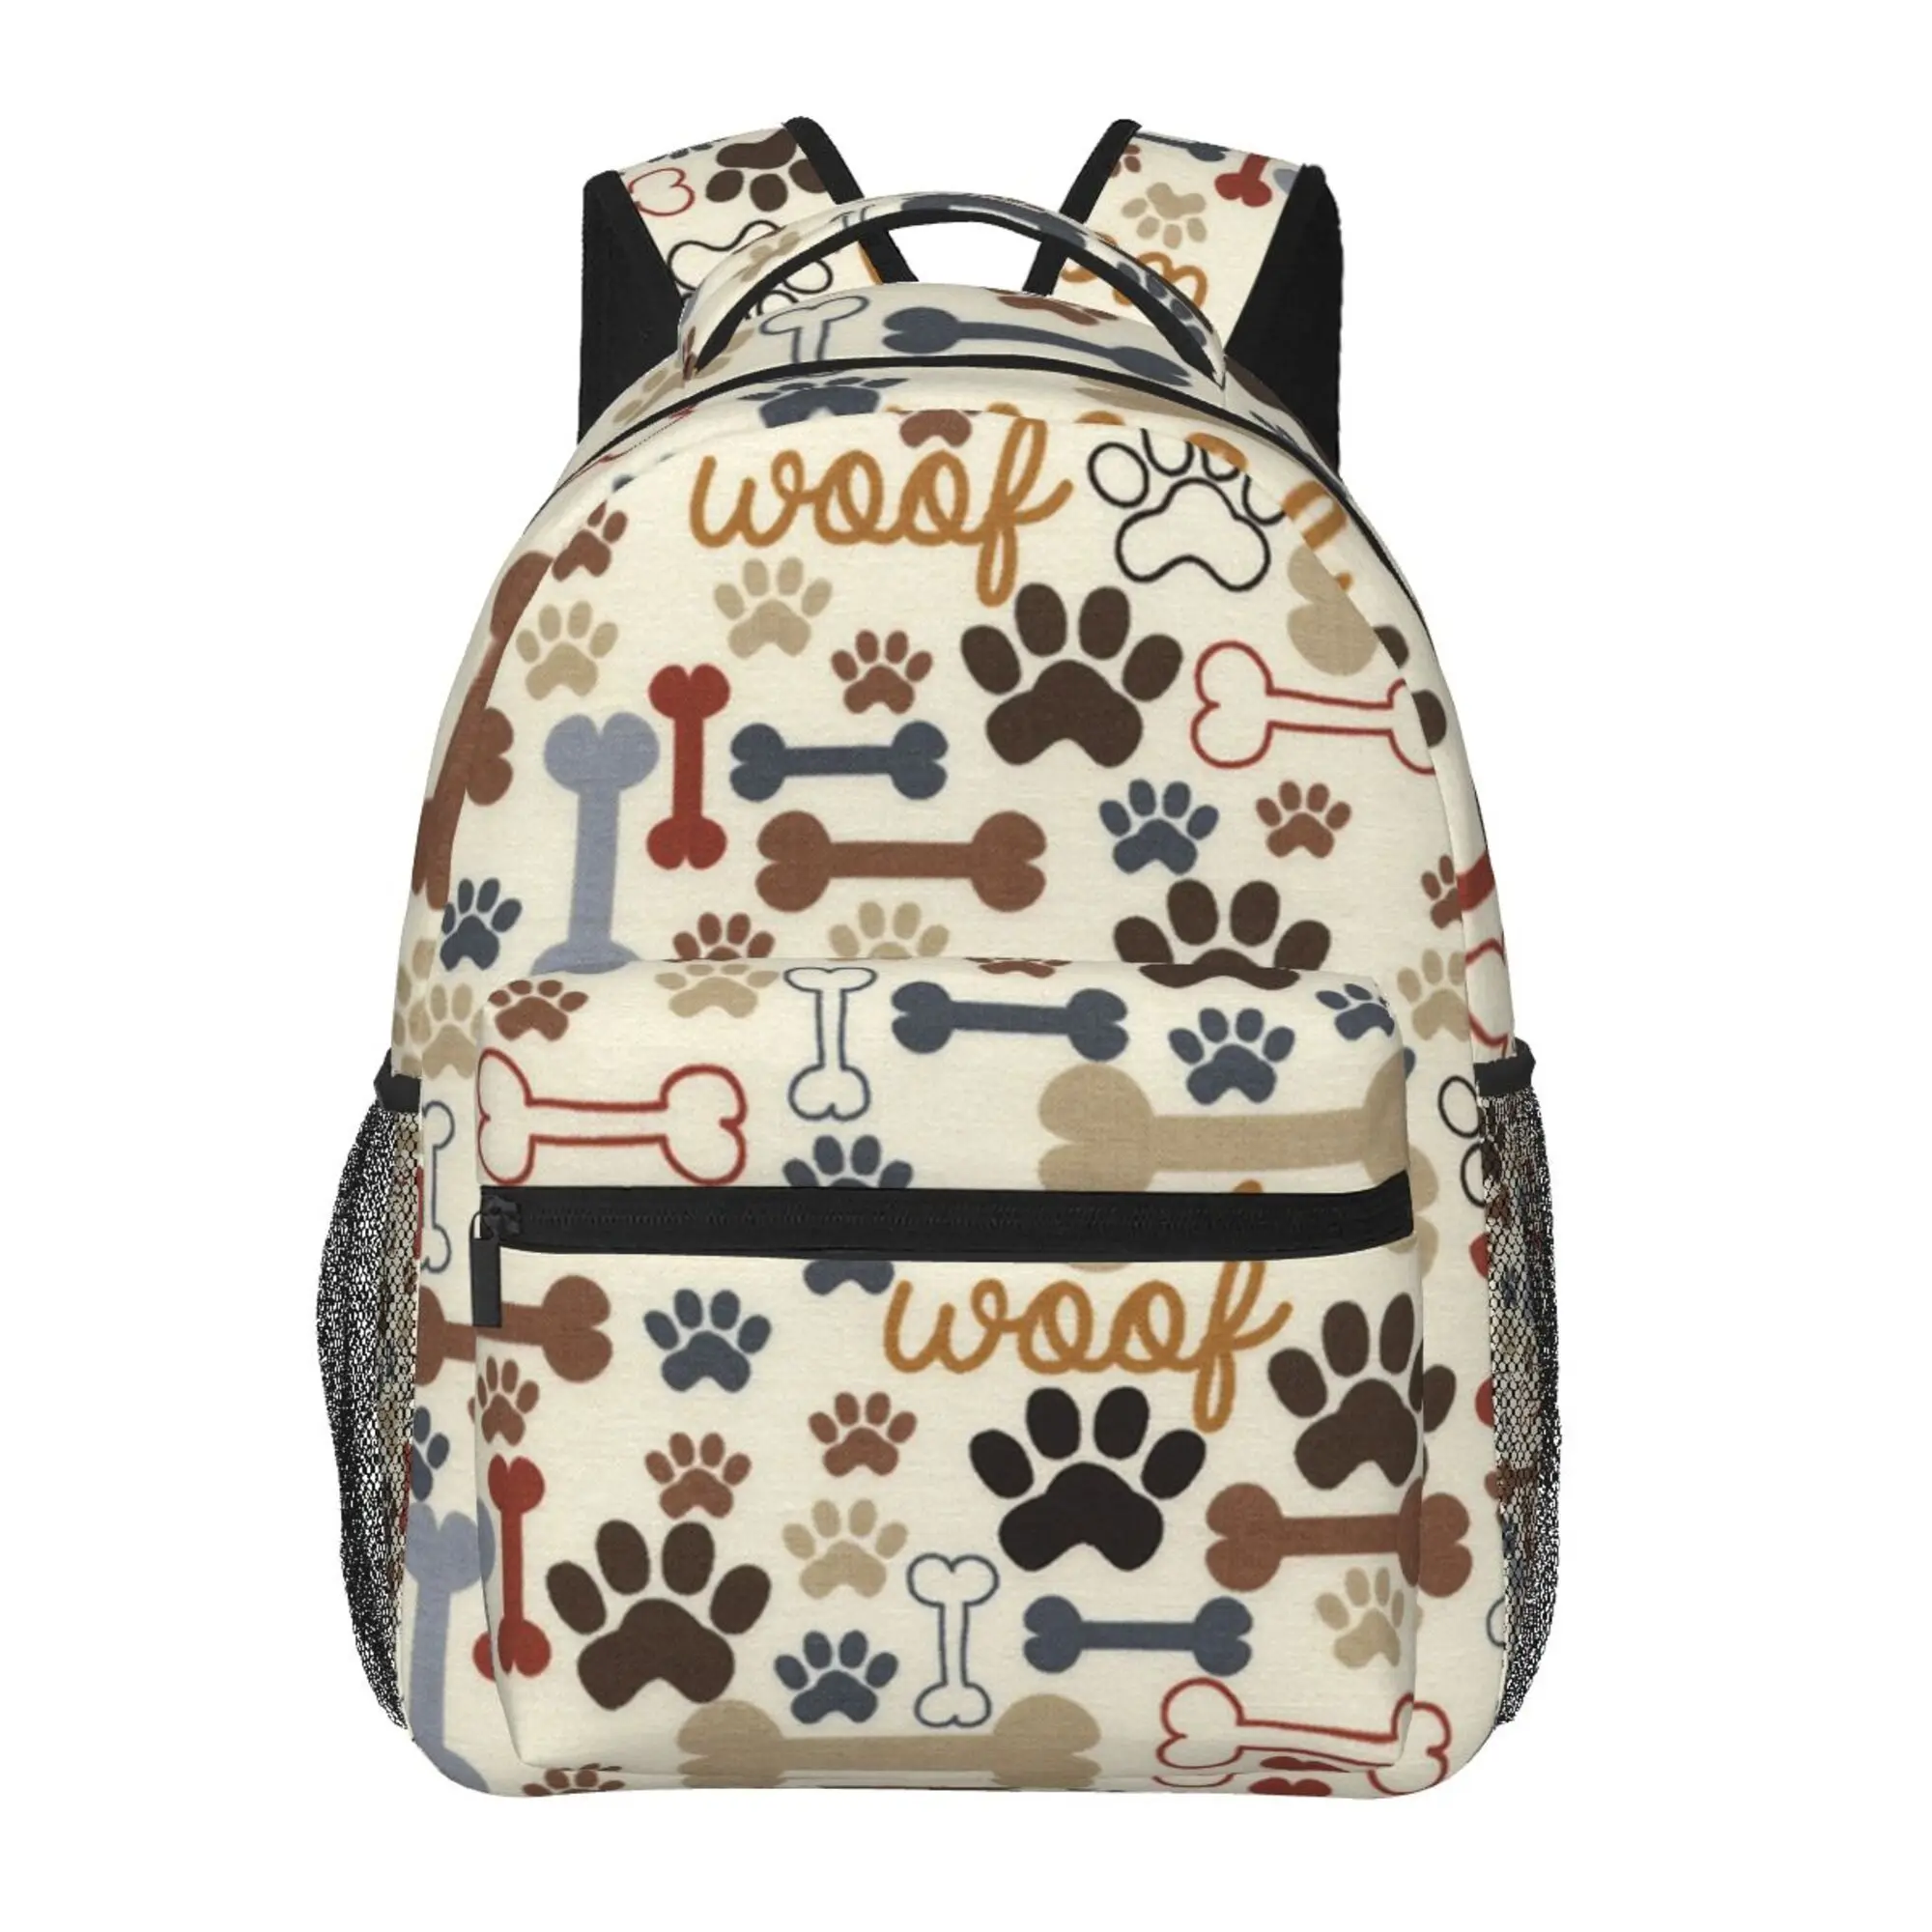 

Dog Bones Paw Prints Premium Backpack Classic Basic Water Resistant Casual Daypack for Travel with Bottle Side Pockets